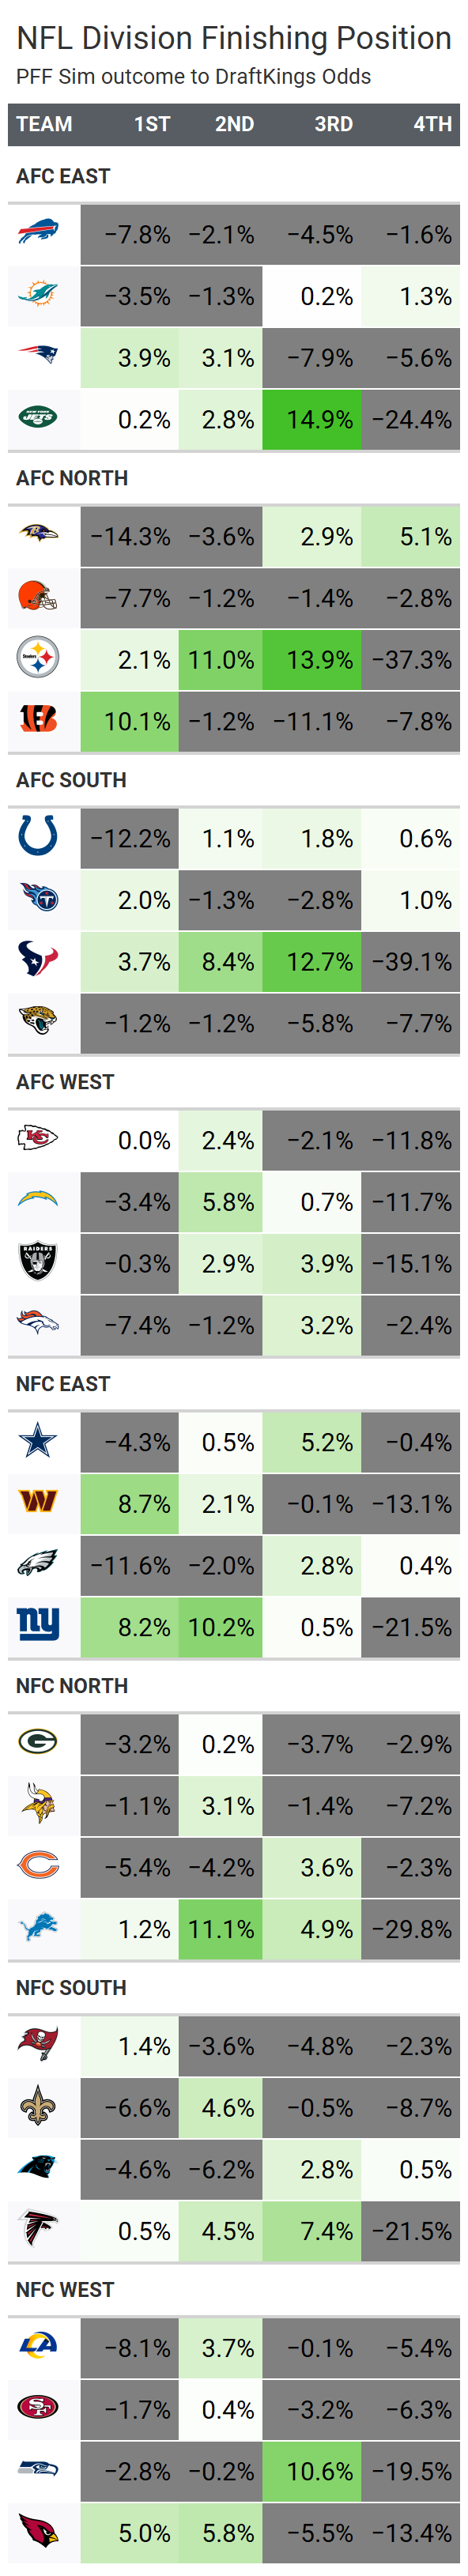 nfc north odds